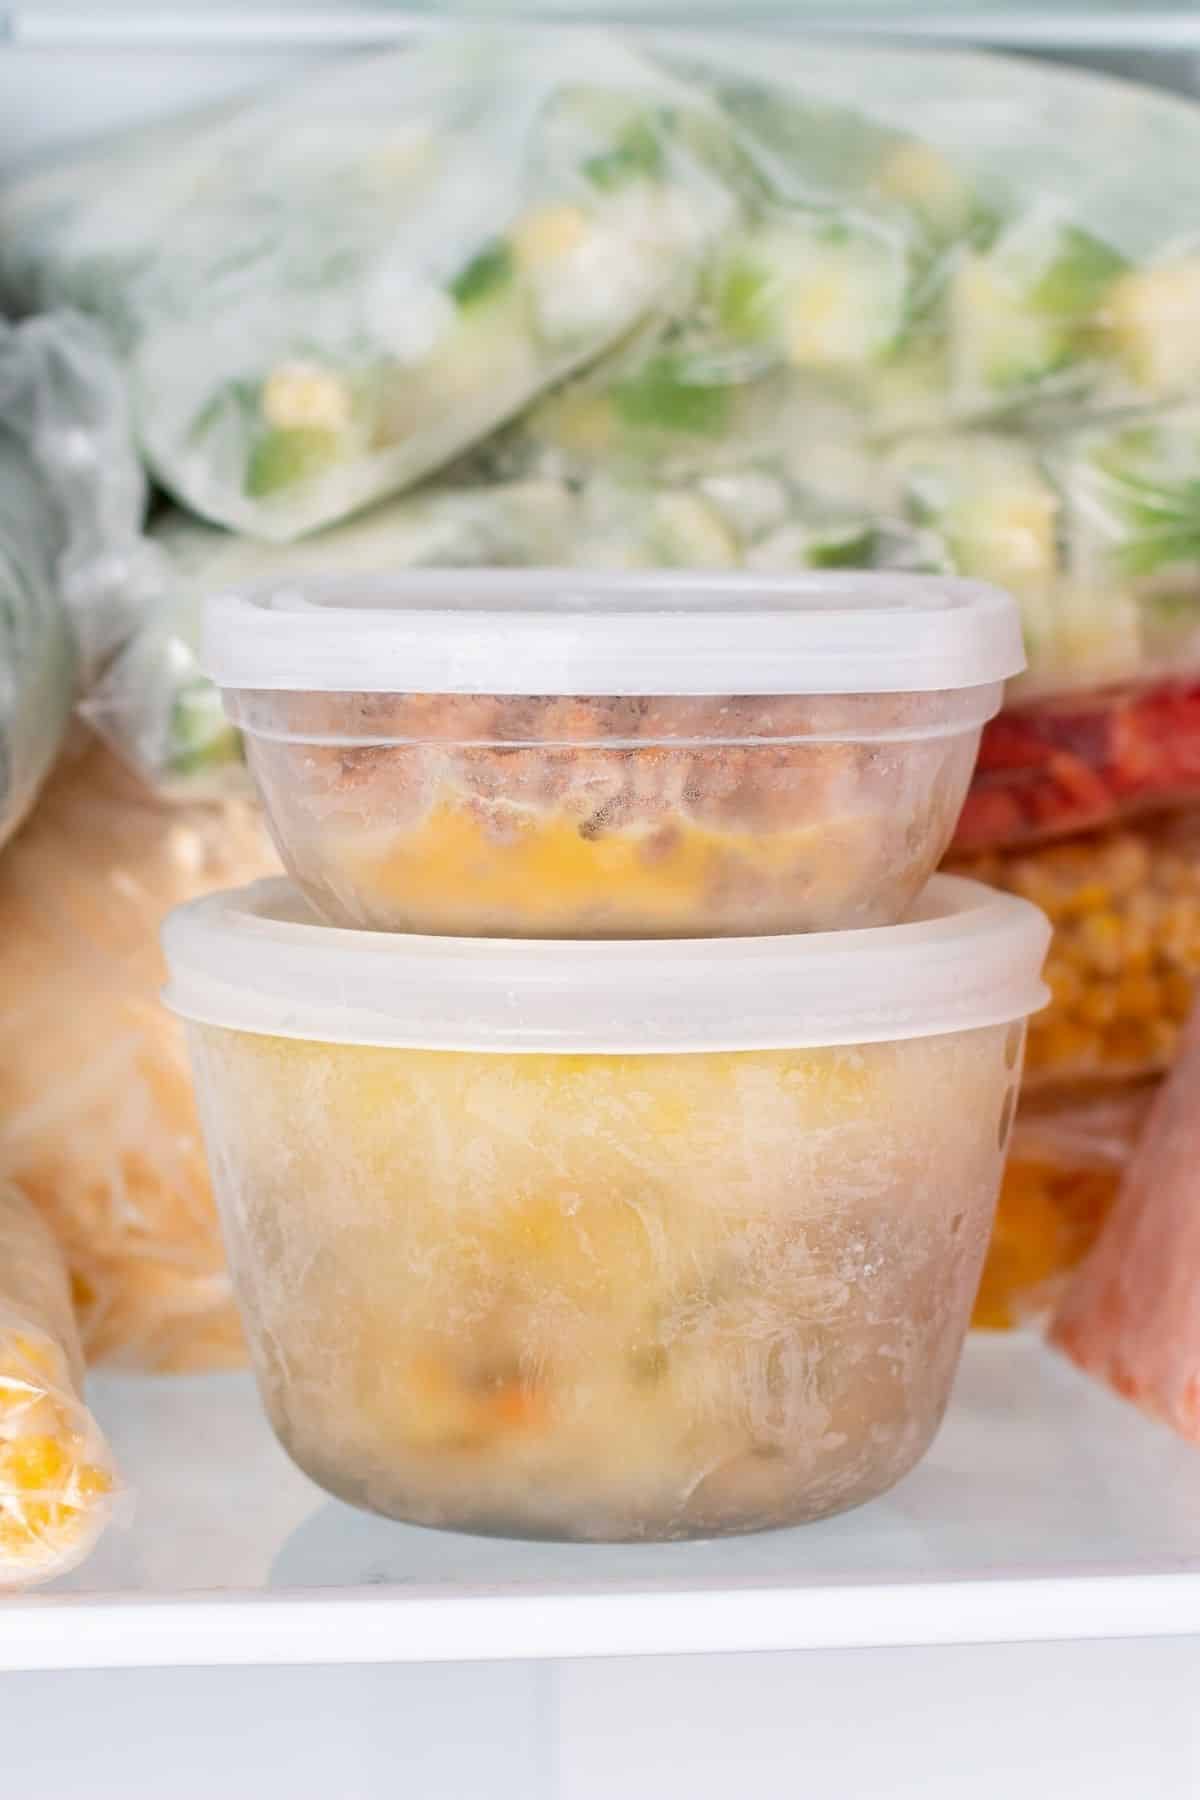 https://www.cleaneatingkitchen.com/wp-content/uploads/2022/03/two-containers-in-a-freezer.jpg